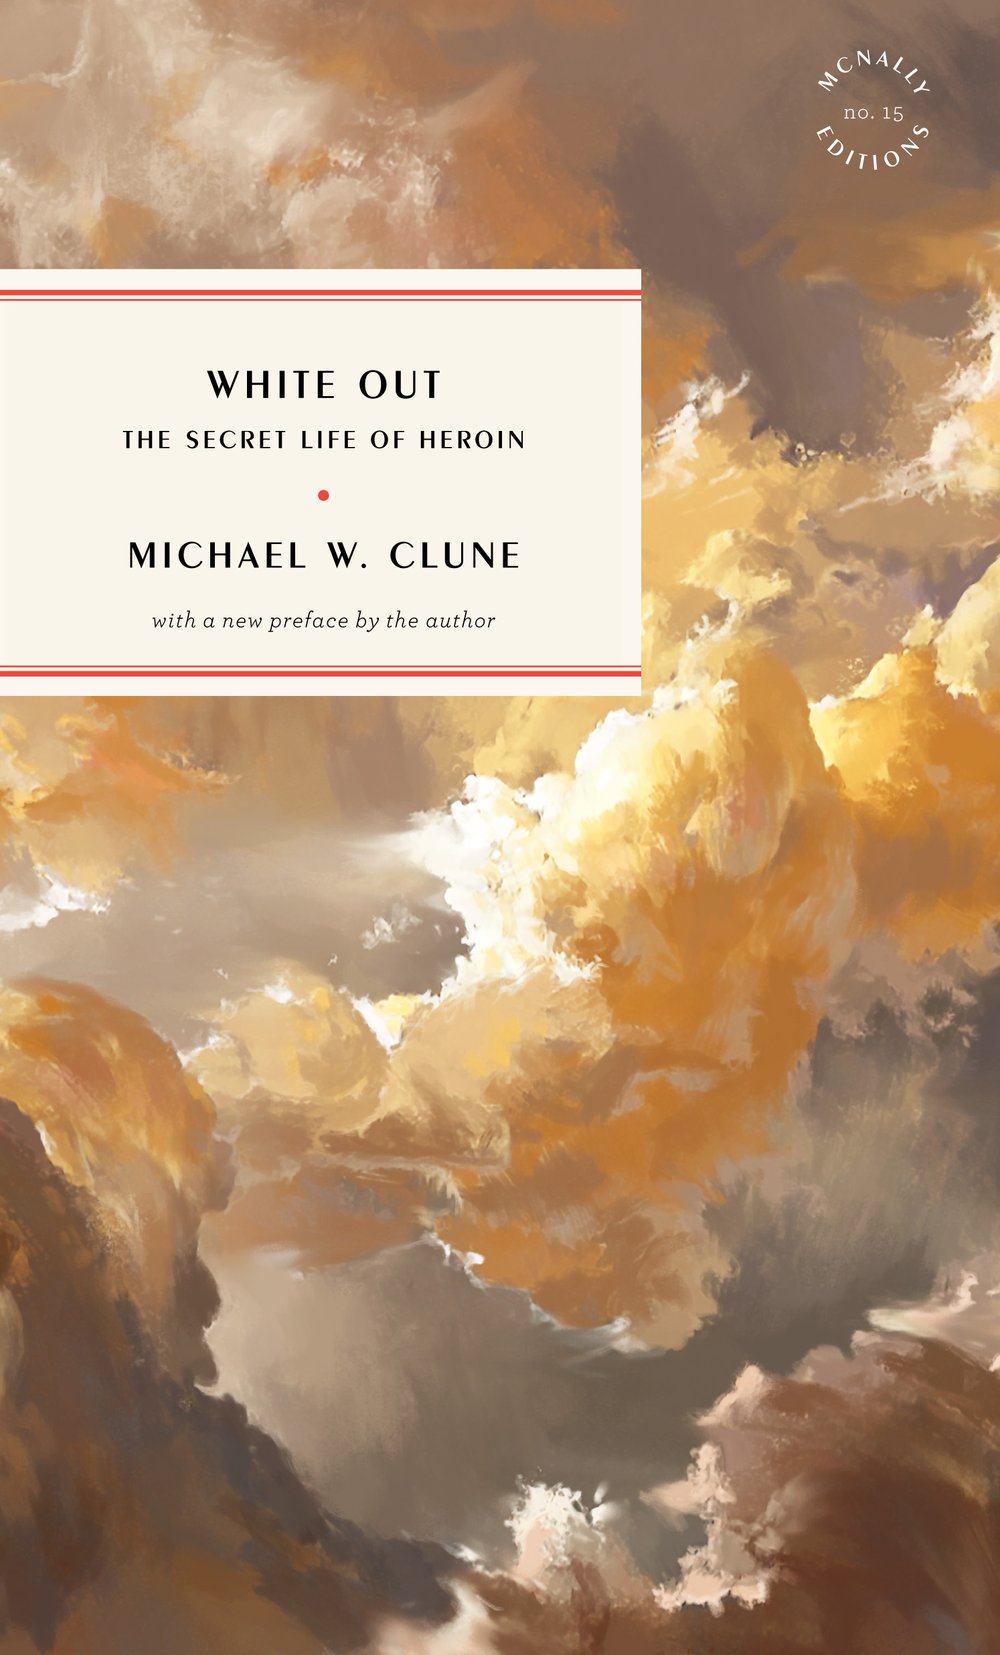 White Out by Michael W. Clune — McNALLY EDITIONS